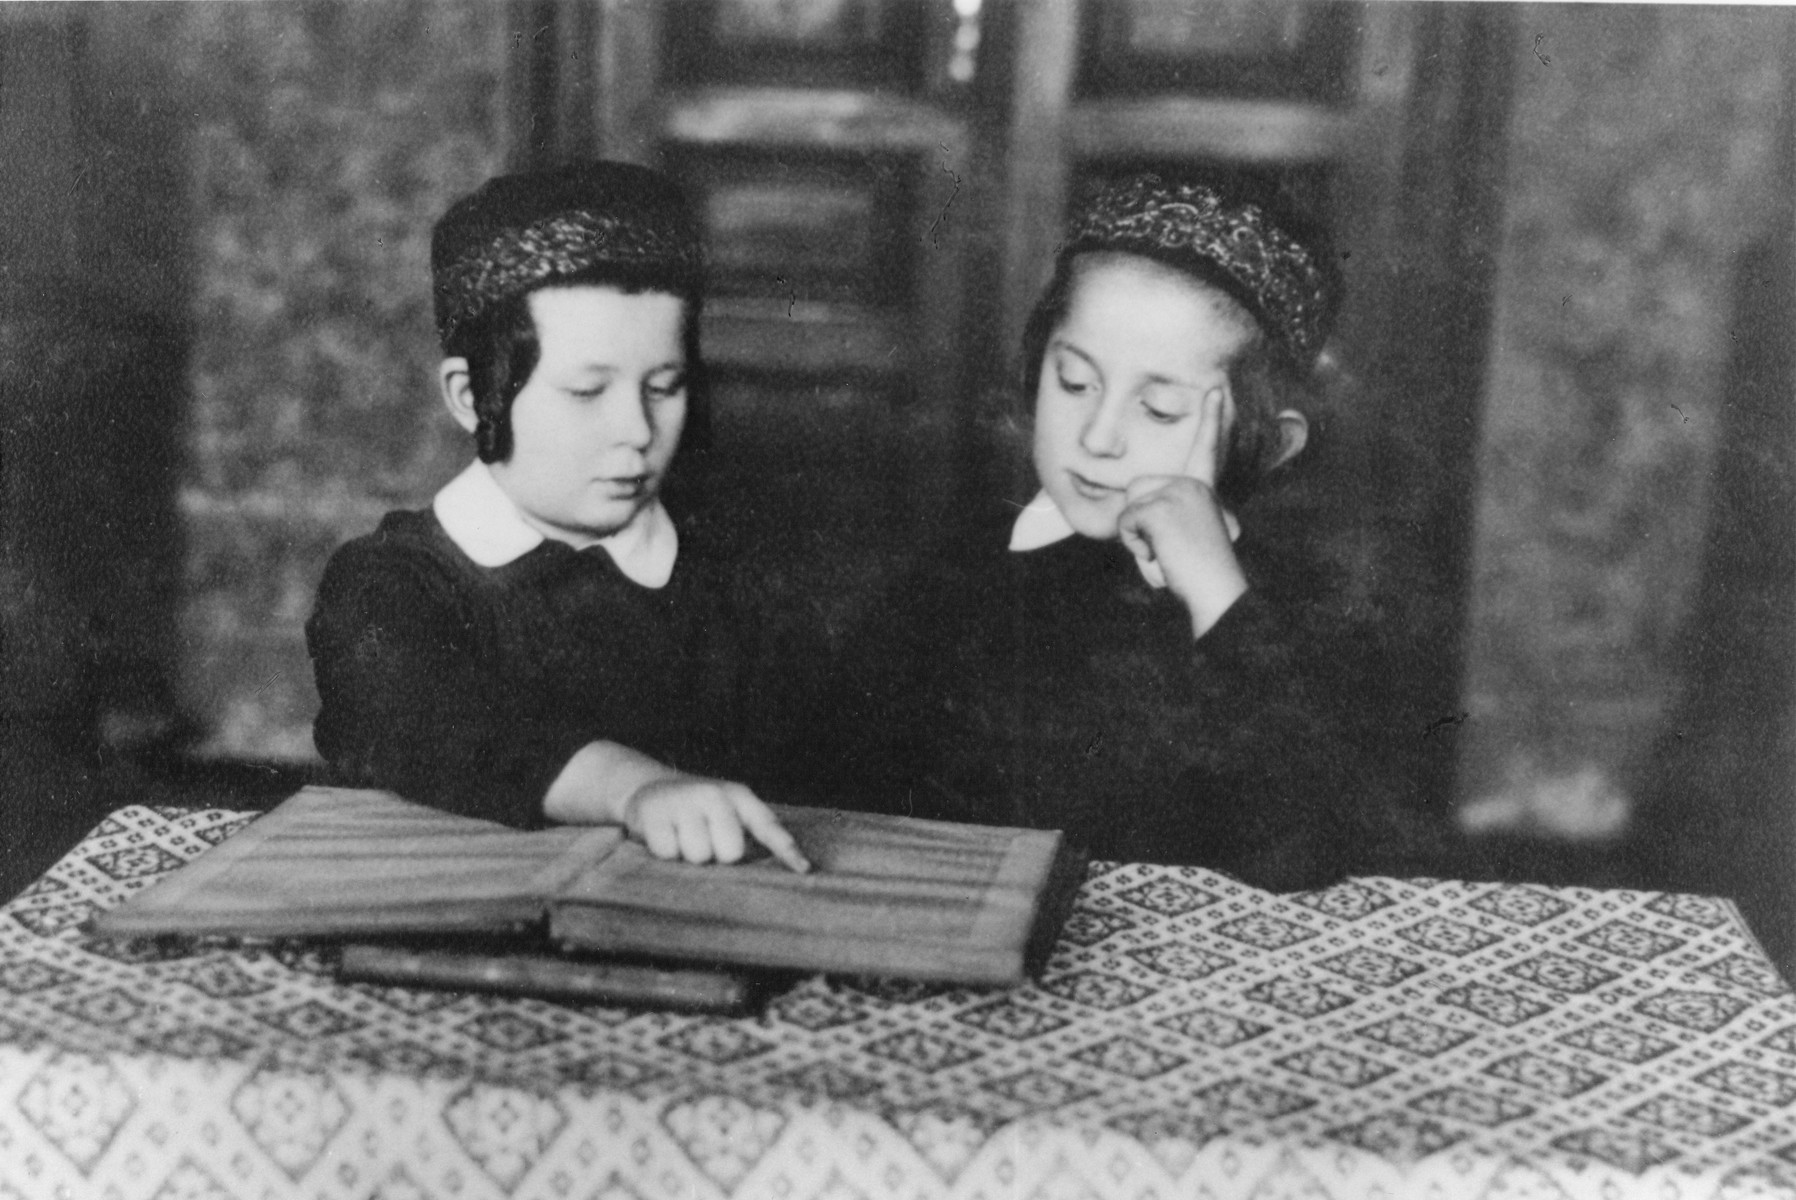 Two young Jewish Hasidic boys study a religious text while seated at a table.

Pictured on the right is Menahem-Mendel Horowitz, the seven-year-old son of Rabbi Tuvia Horowitz.